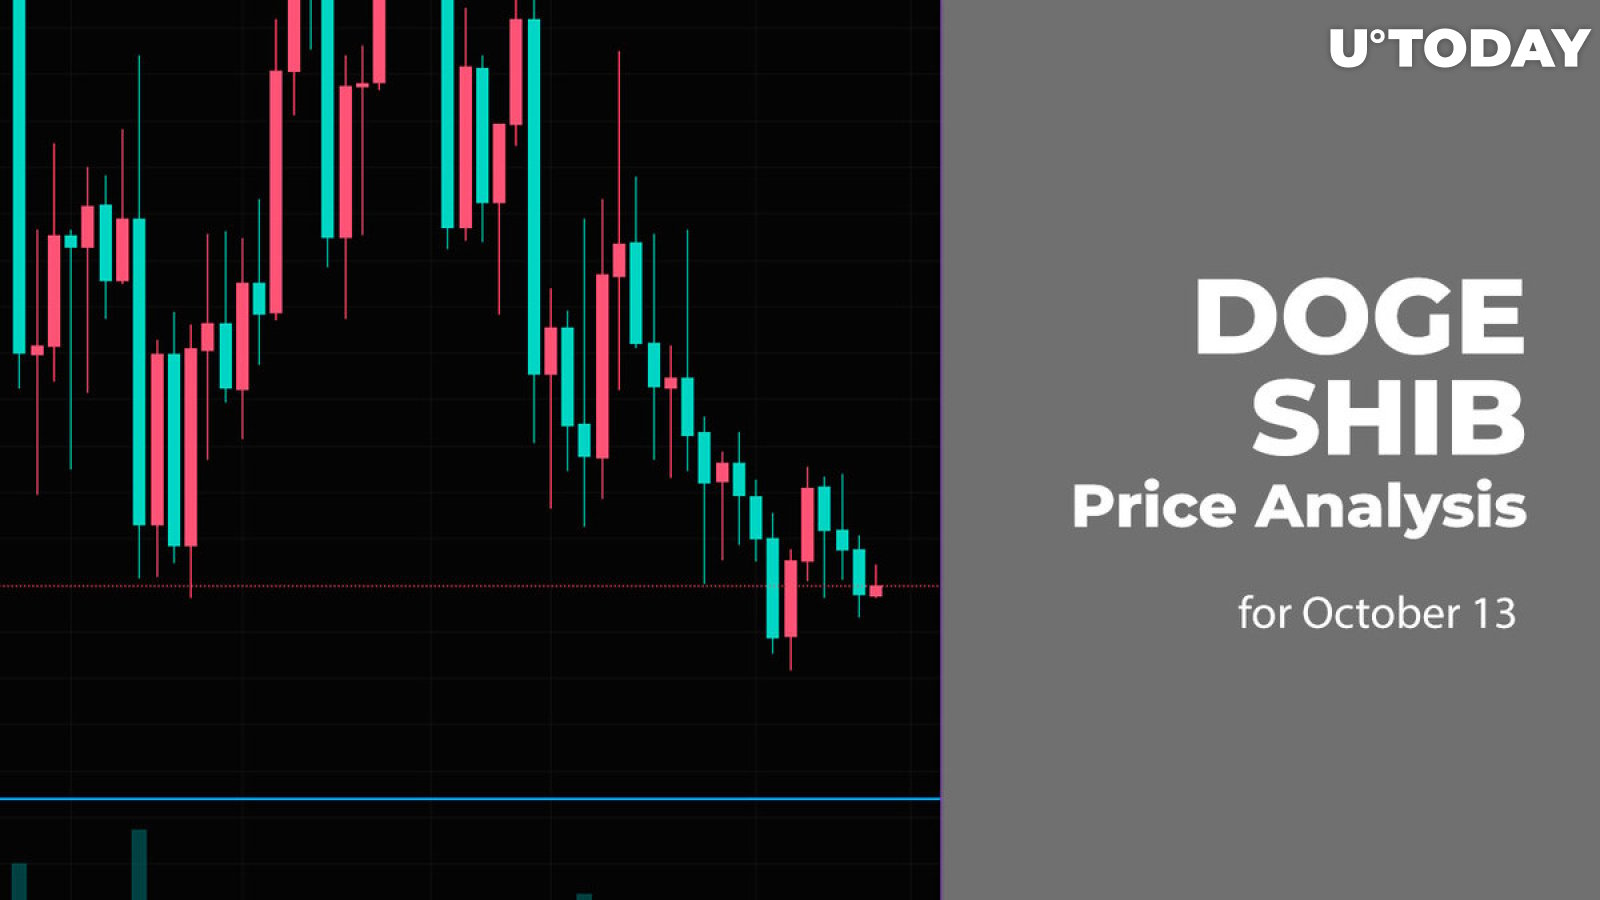 DOGE and SHIB Price Analysis for October 13